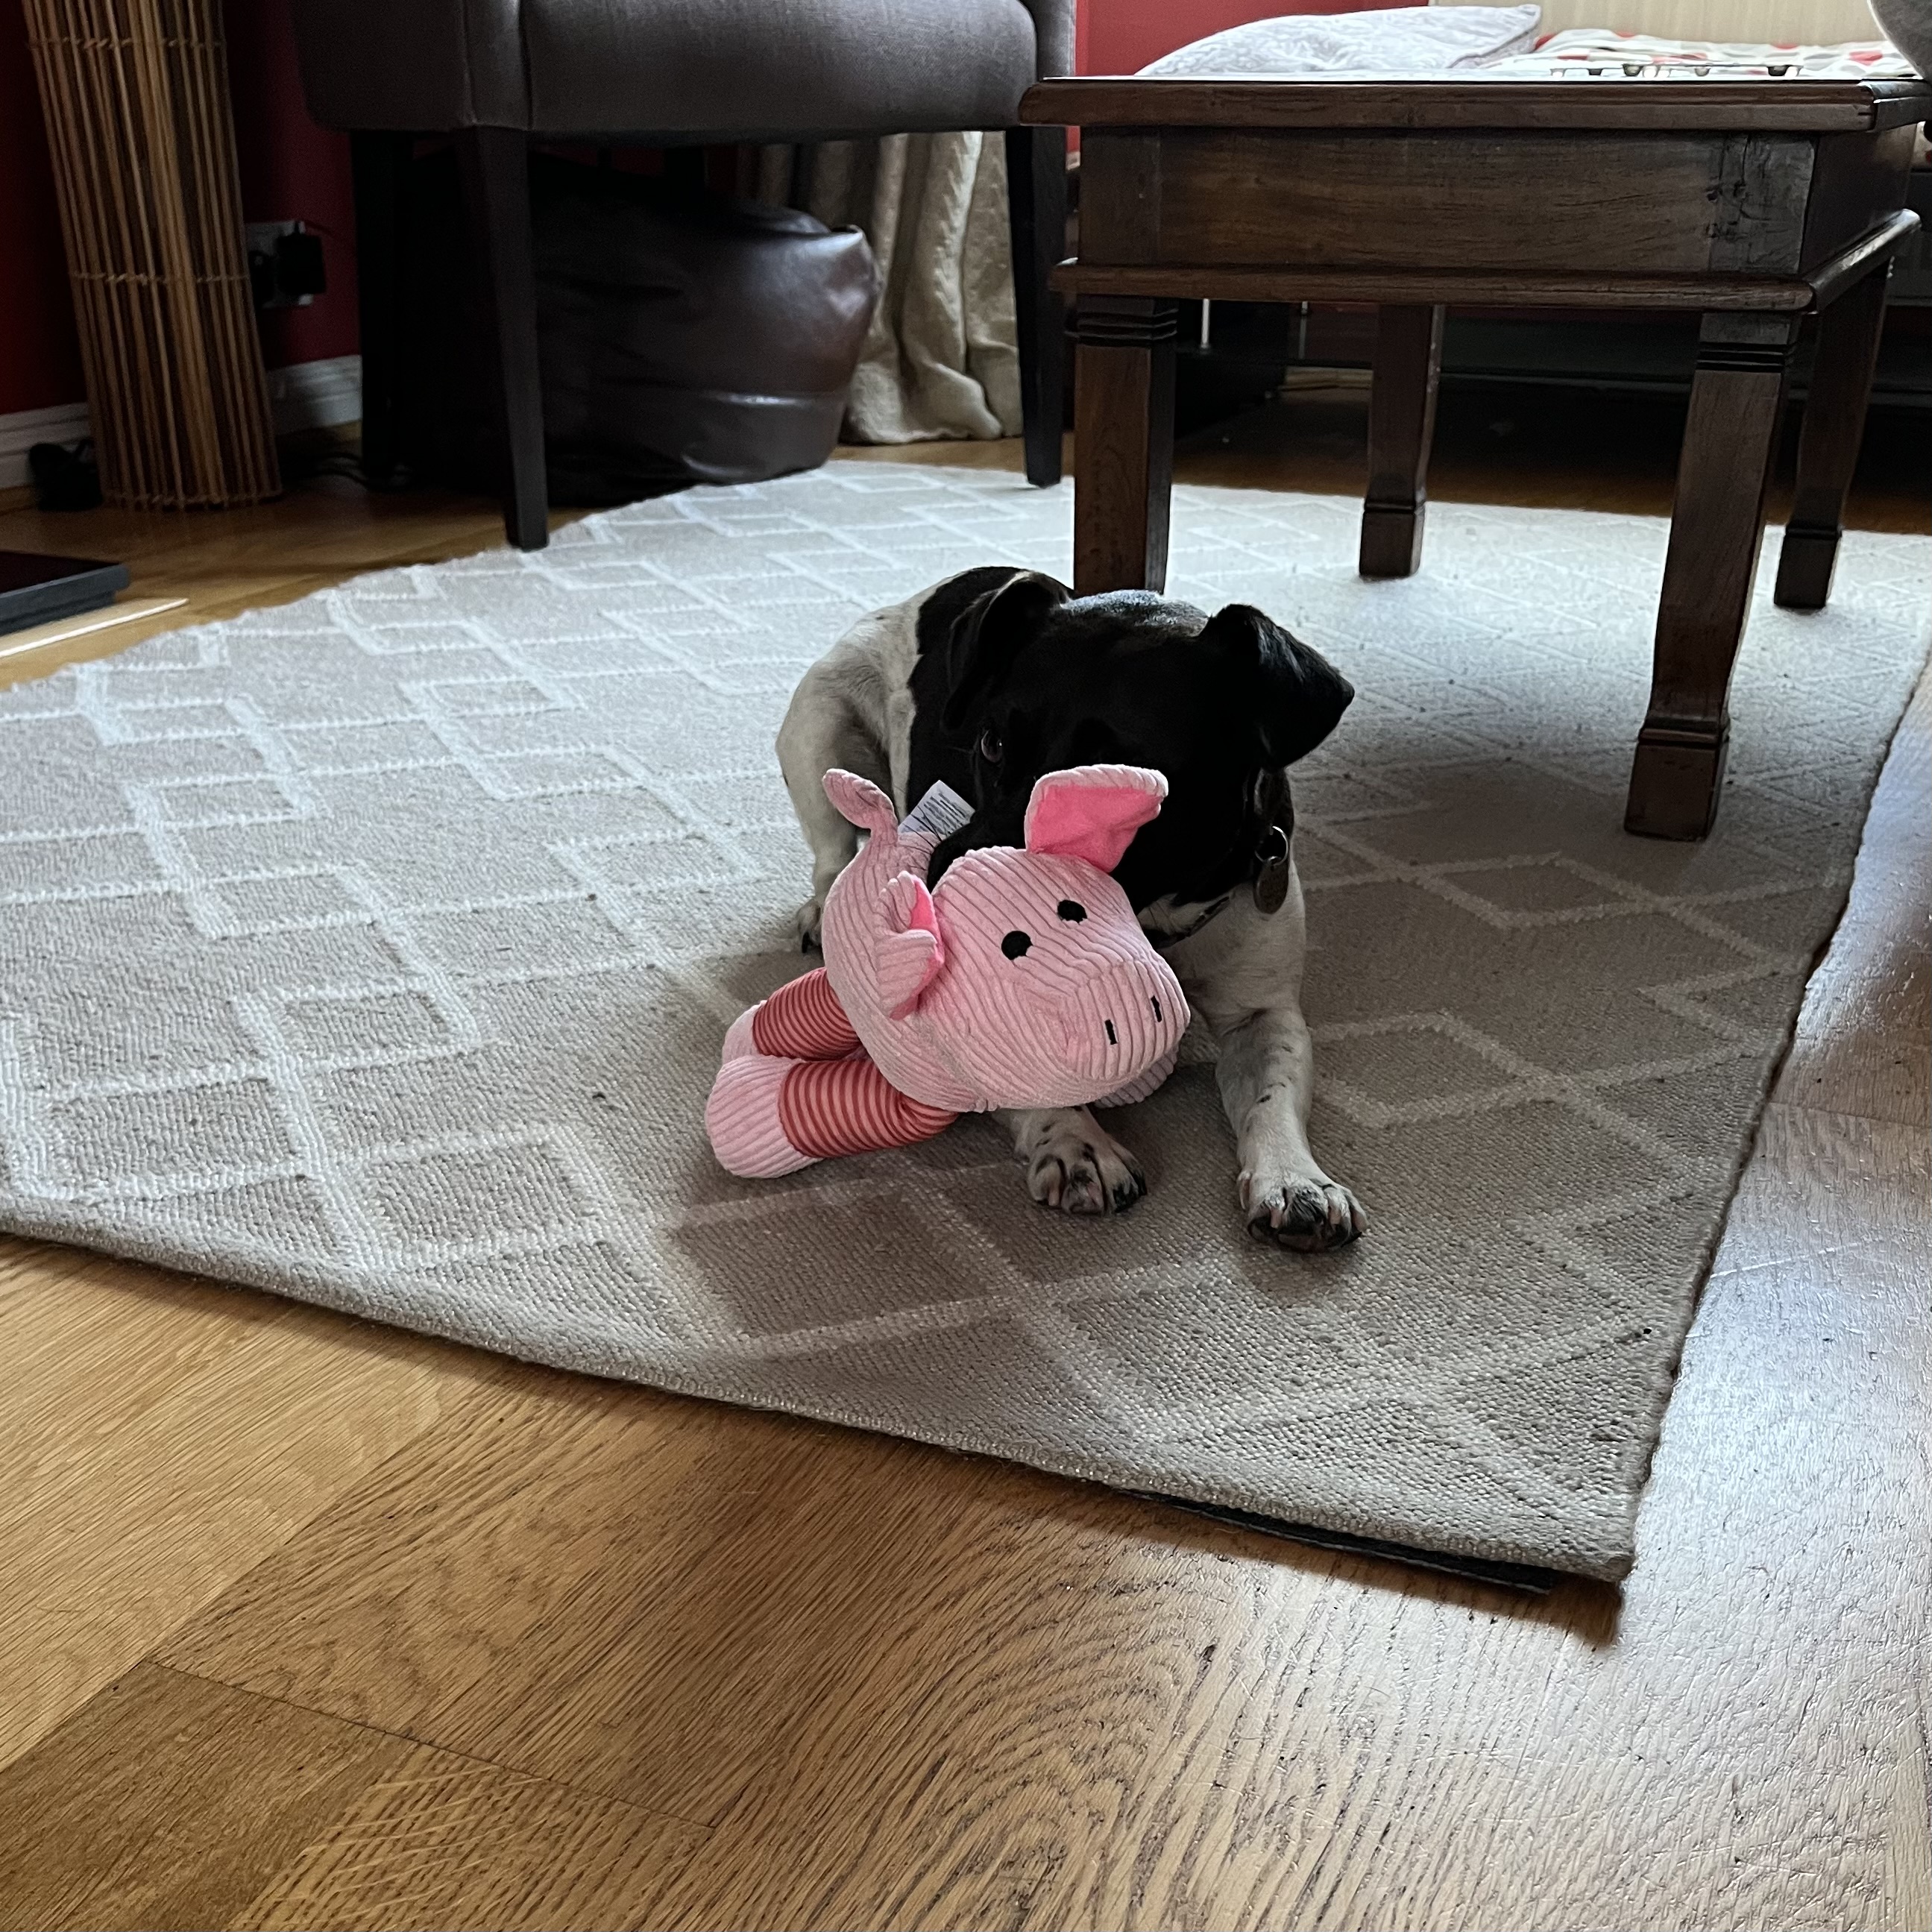 I’ve got a new toy… a squeaky pig 🐽